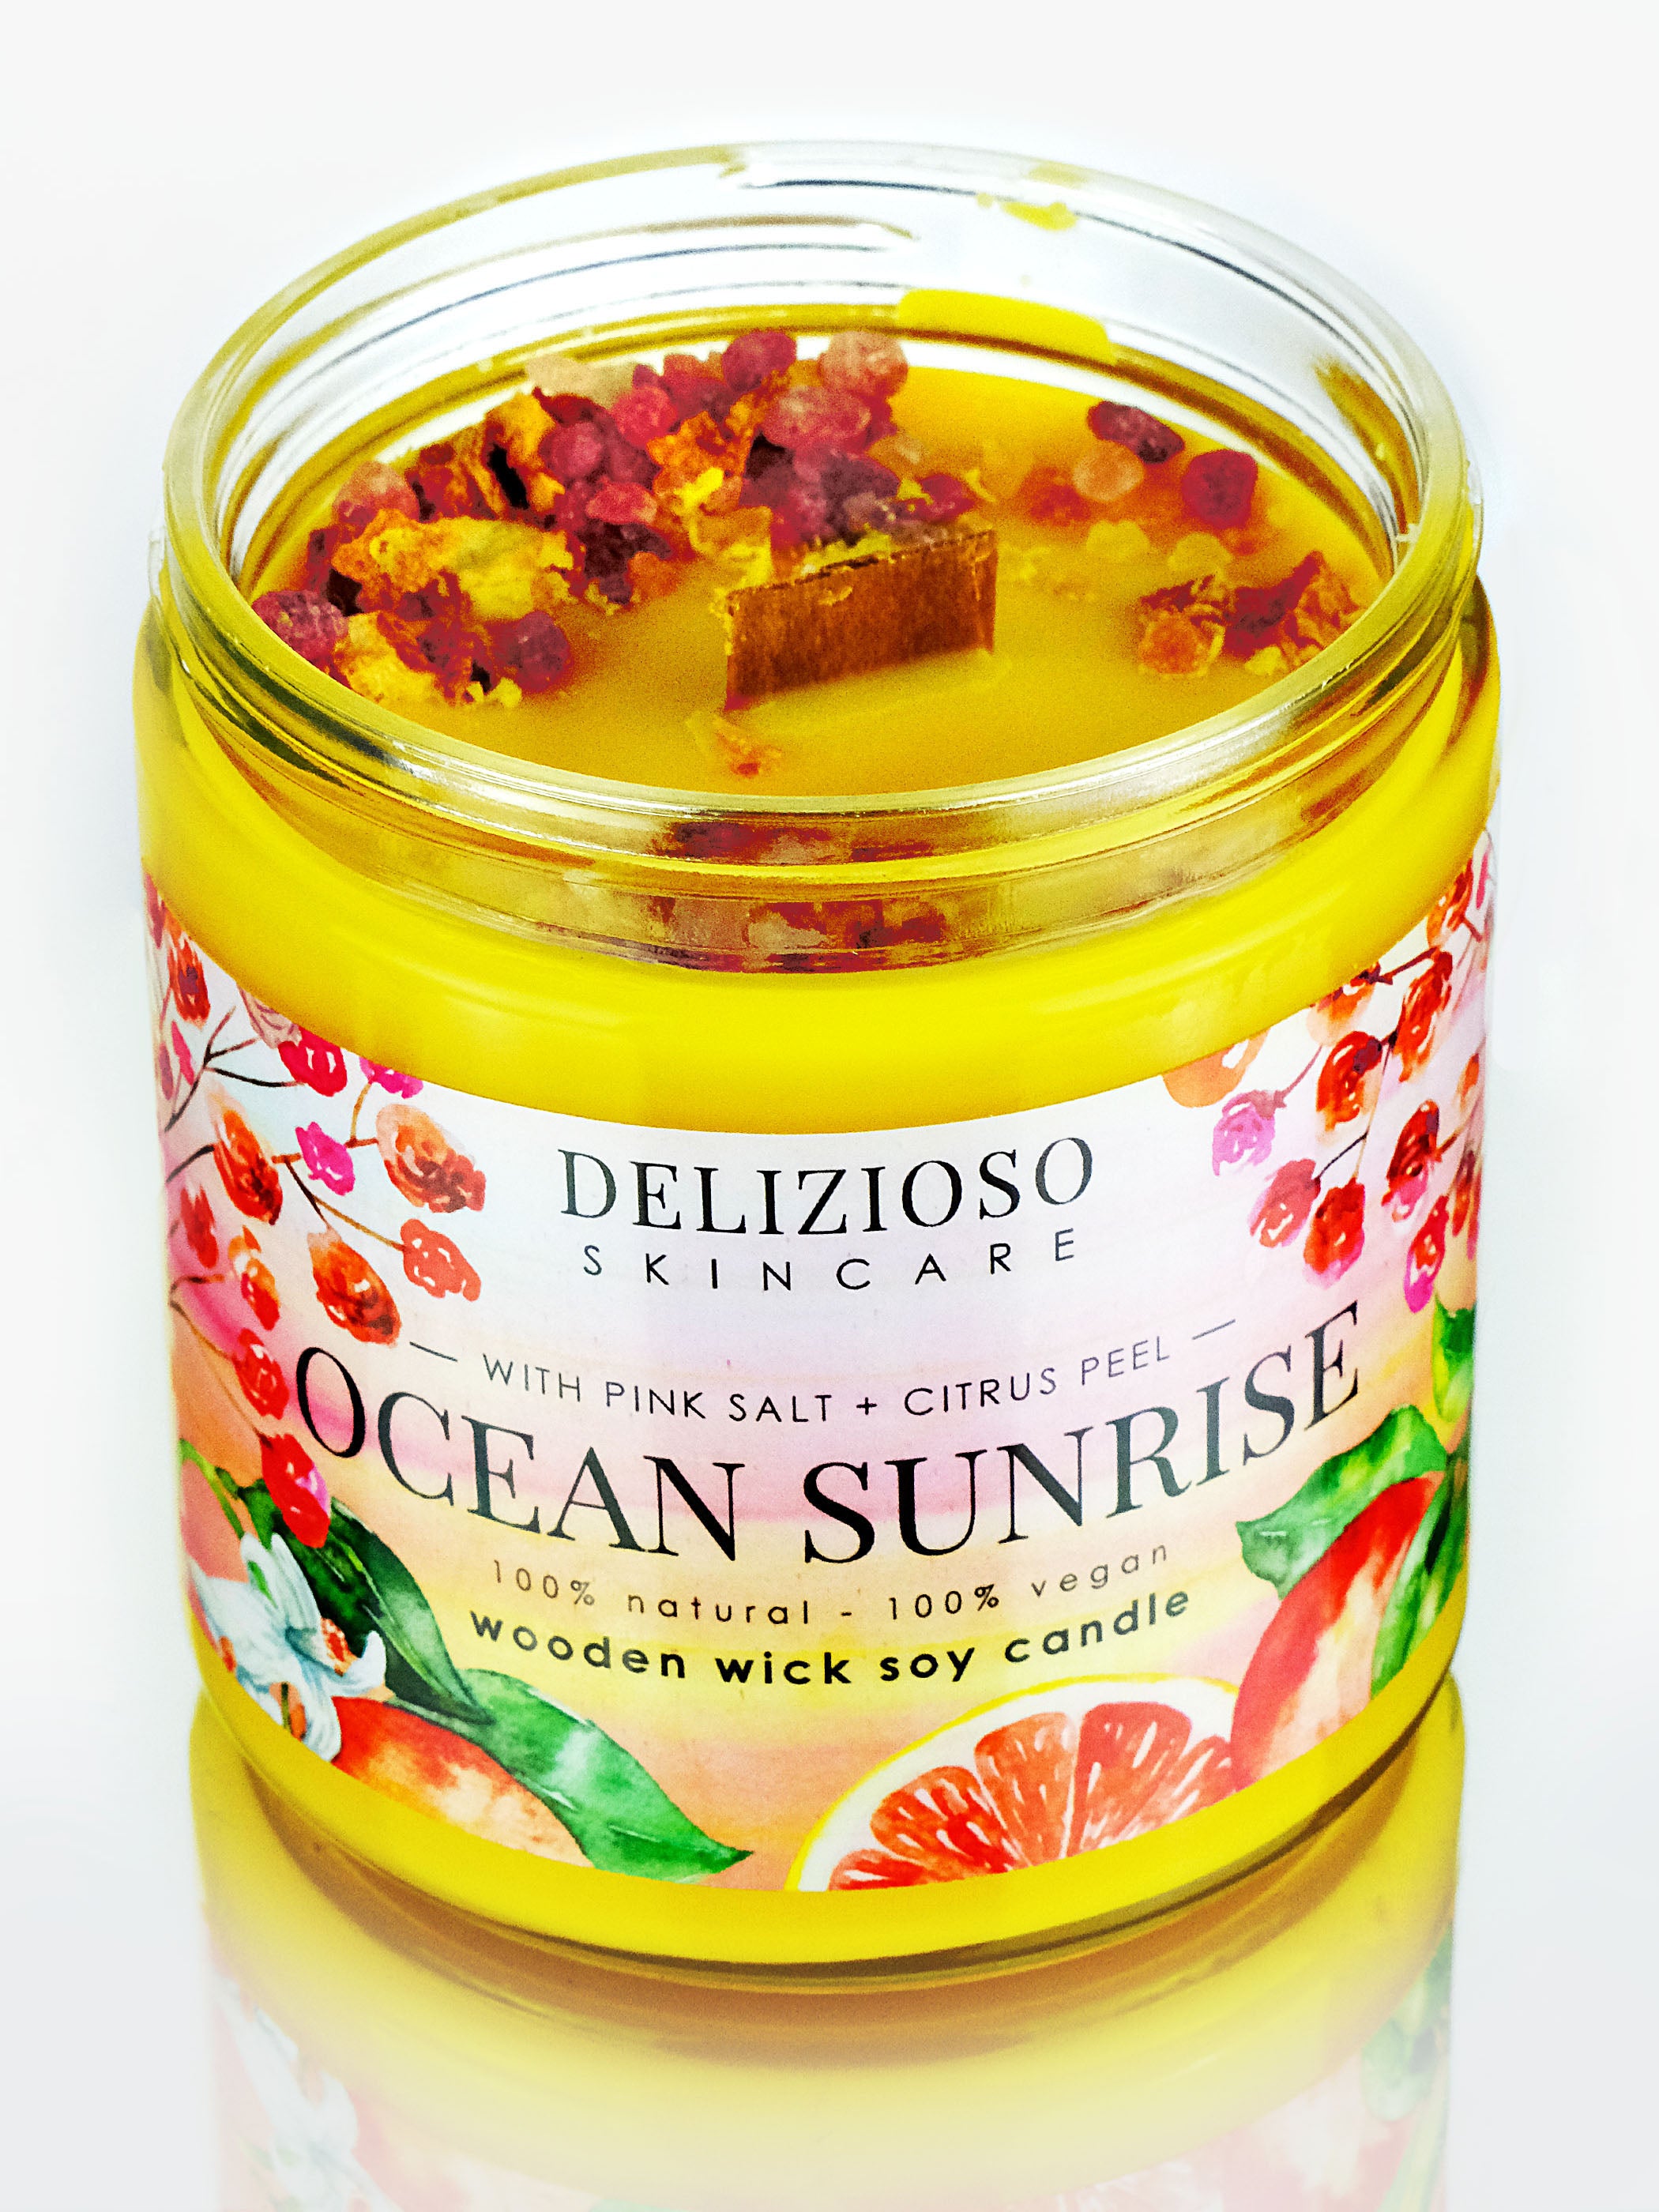 Ocean Sunrise Wooden Wick Soy Lotion Candle